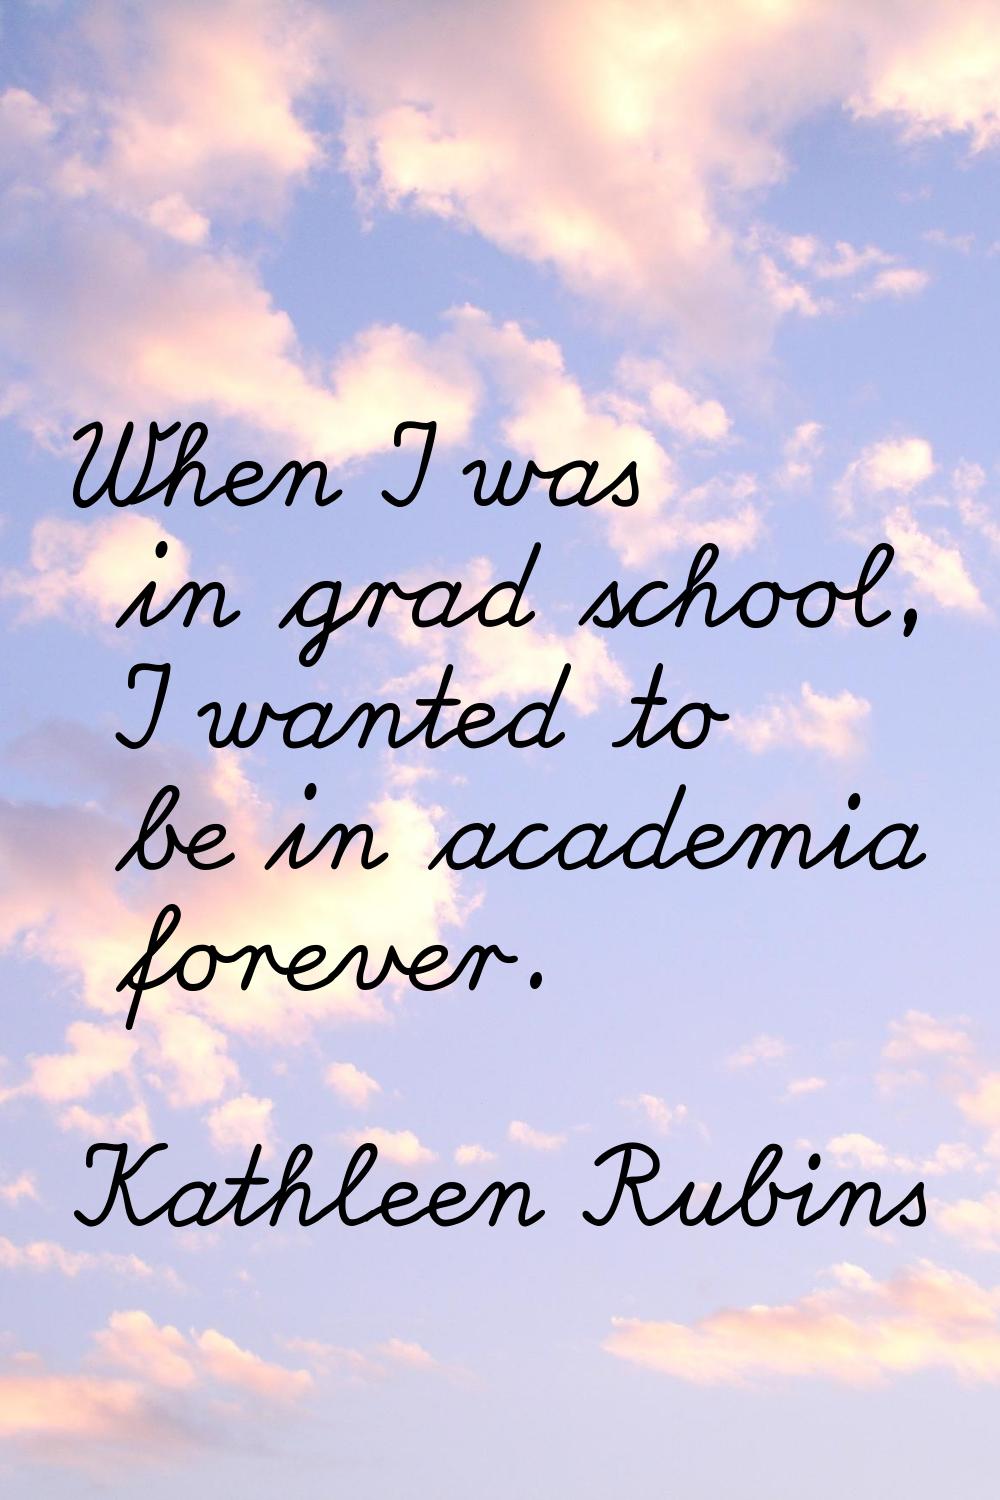 When I was in grad school, I wanted to be in academia forever.